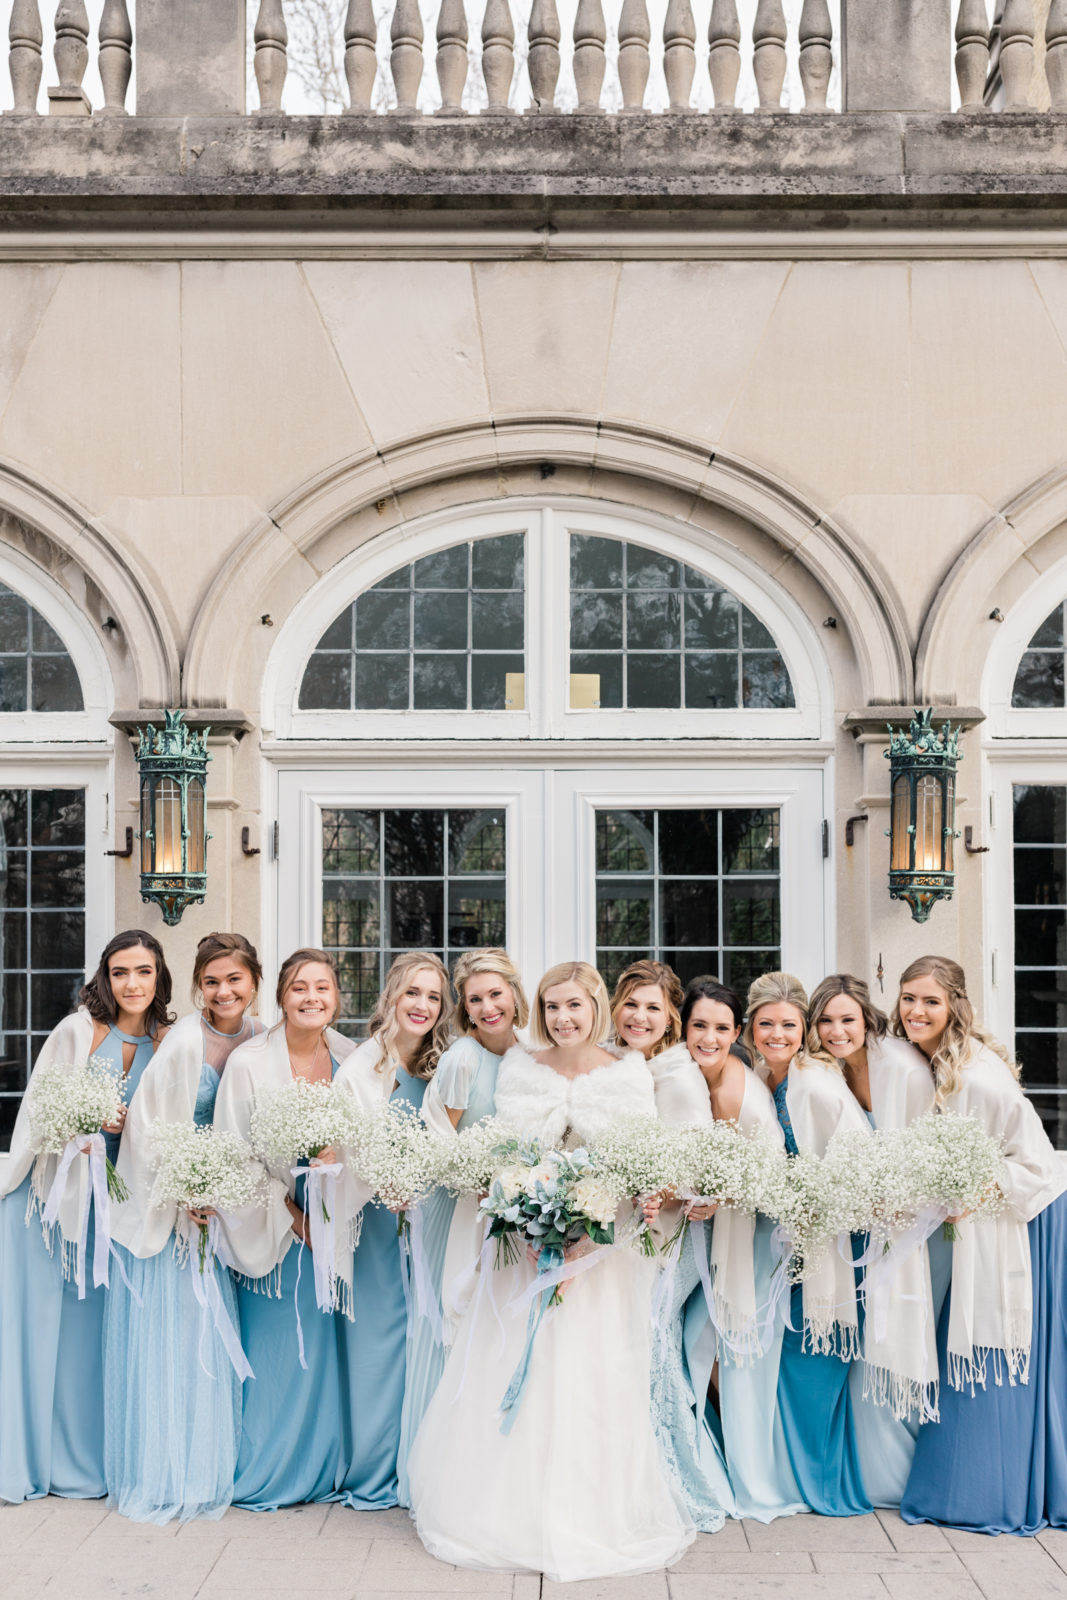 Laurel Hall Wedding Photographer | Estate Wedding Venue | Midwest Film Photographer | Molly Carr Photography | Mismatched Bridesmaid Dresses French Blue